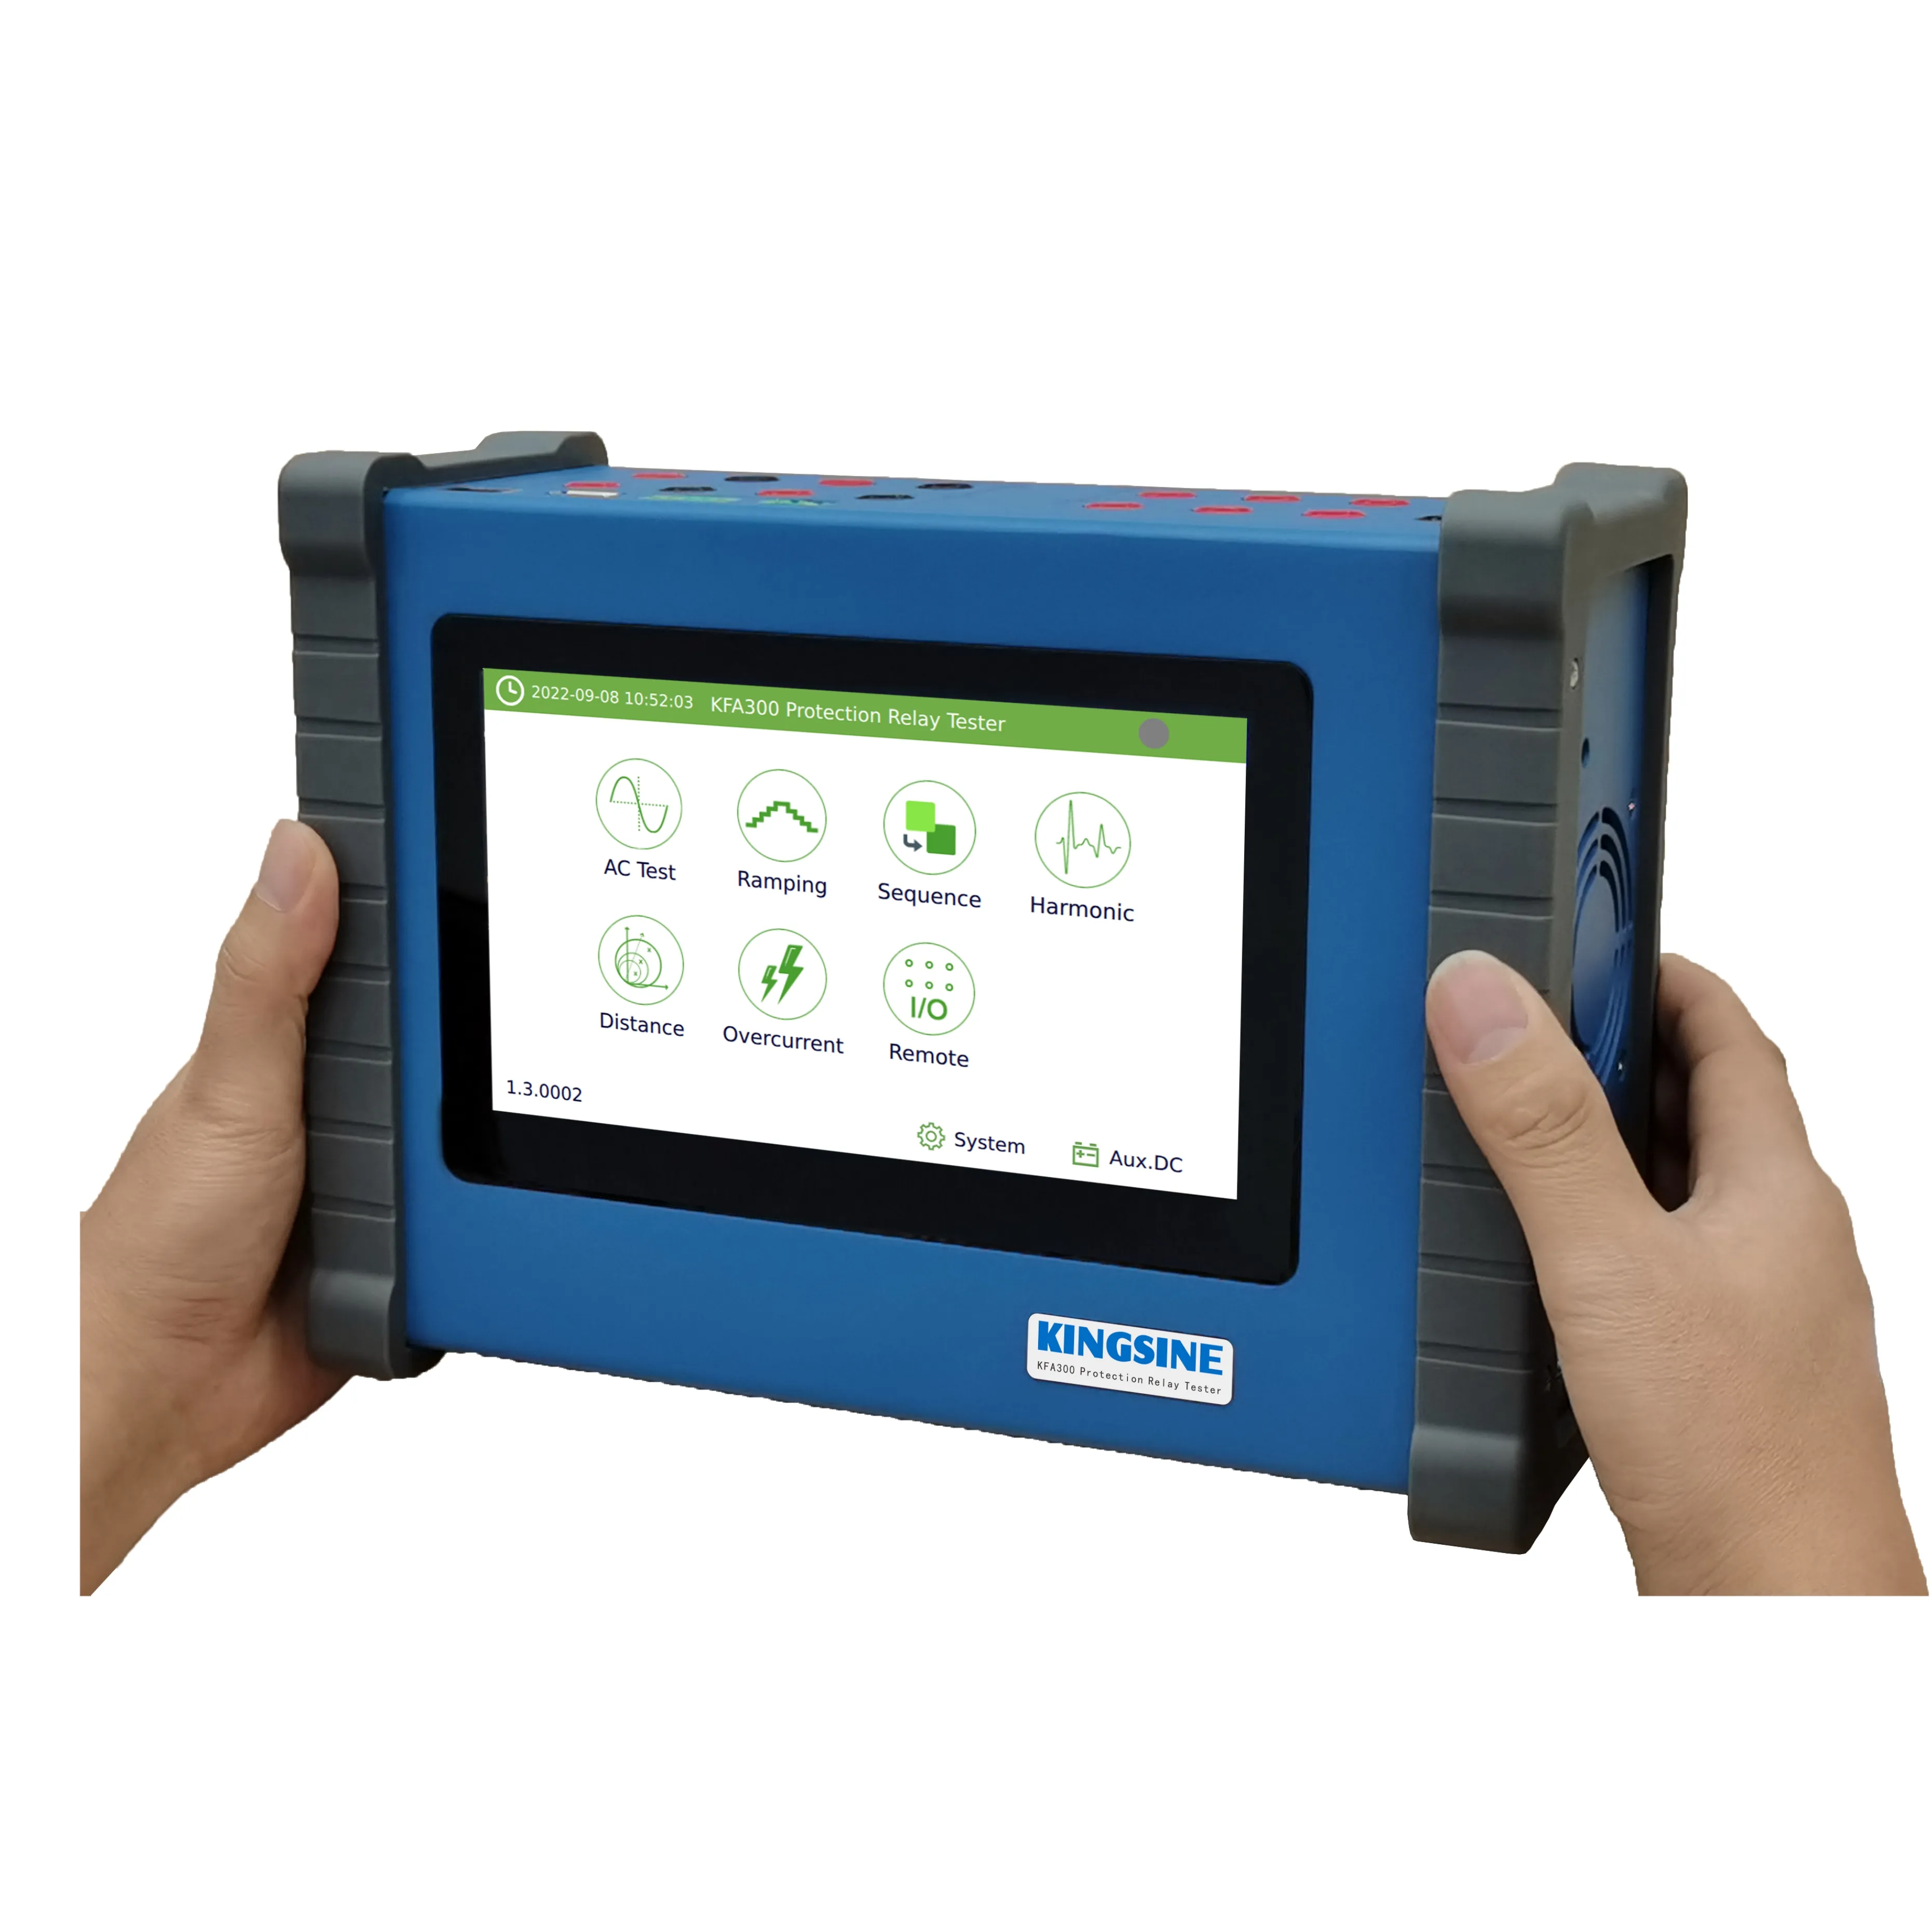 Kingsine portable test equipment with large LED/LCD backlit touchscreen KFA300 protective relay test set